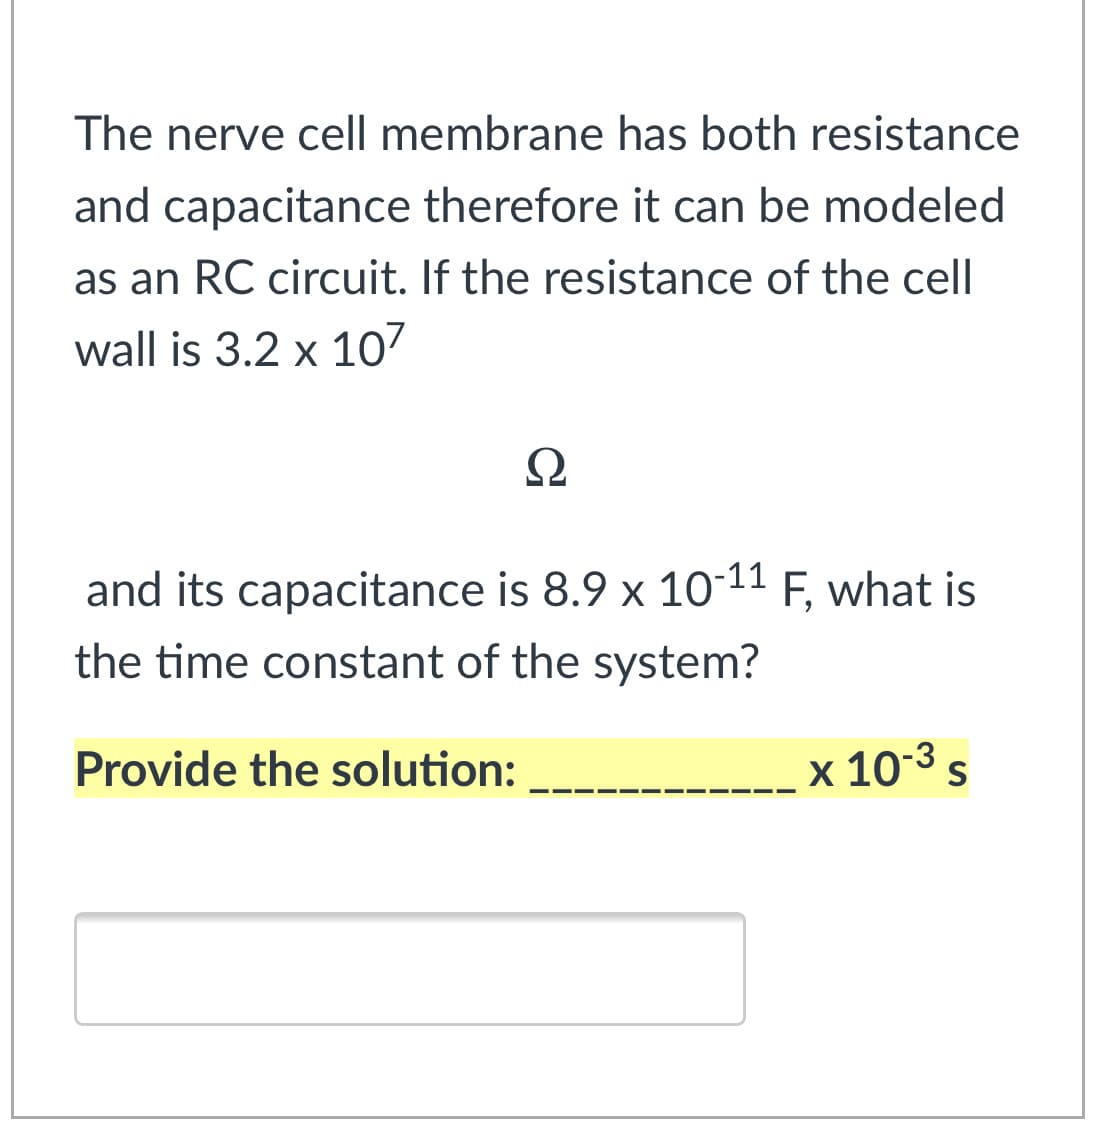 The nerve cell membrane has both resistance
and capacitance therefore it can be modeled
as an RC circuit. If the resistance of the cell
wall is 3.2 x 107
Ω
and its capacitance is 8.9 x 10-11 F, what is
the time constant of the system?
Provide the solution:
x 10-3 s
S
